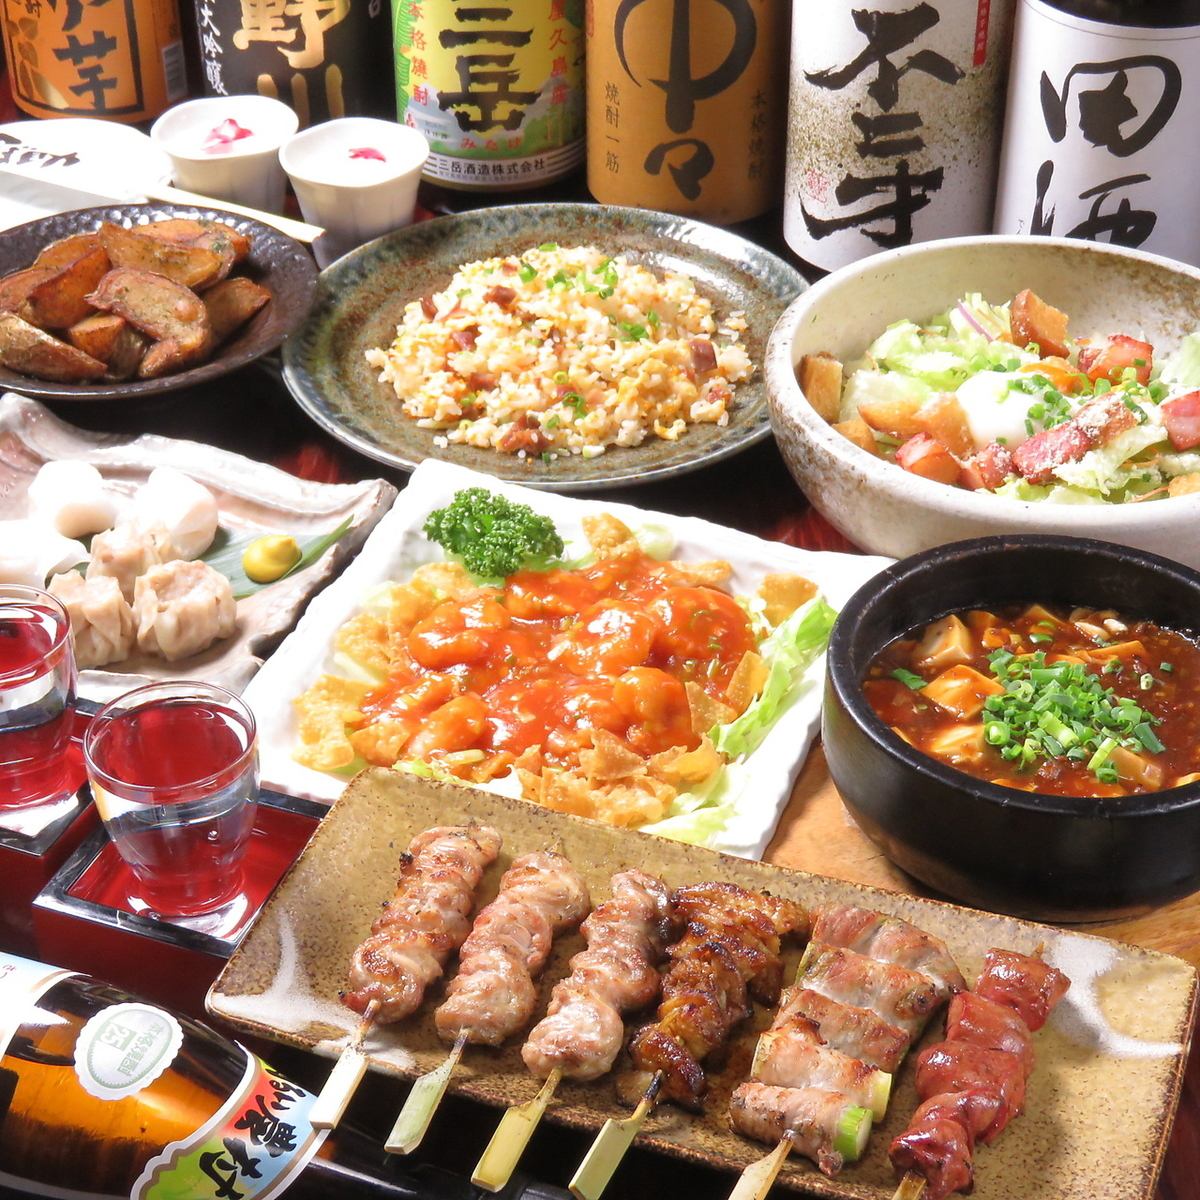 From Monday to Thursday, you can enjoy a course meal for a reasonable price of 3,300 yen.